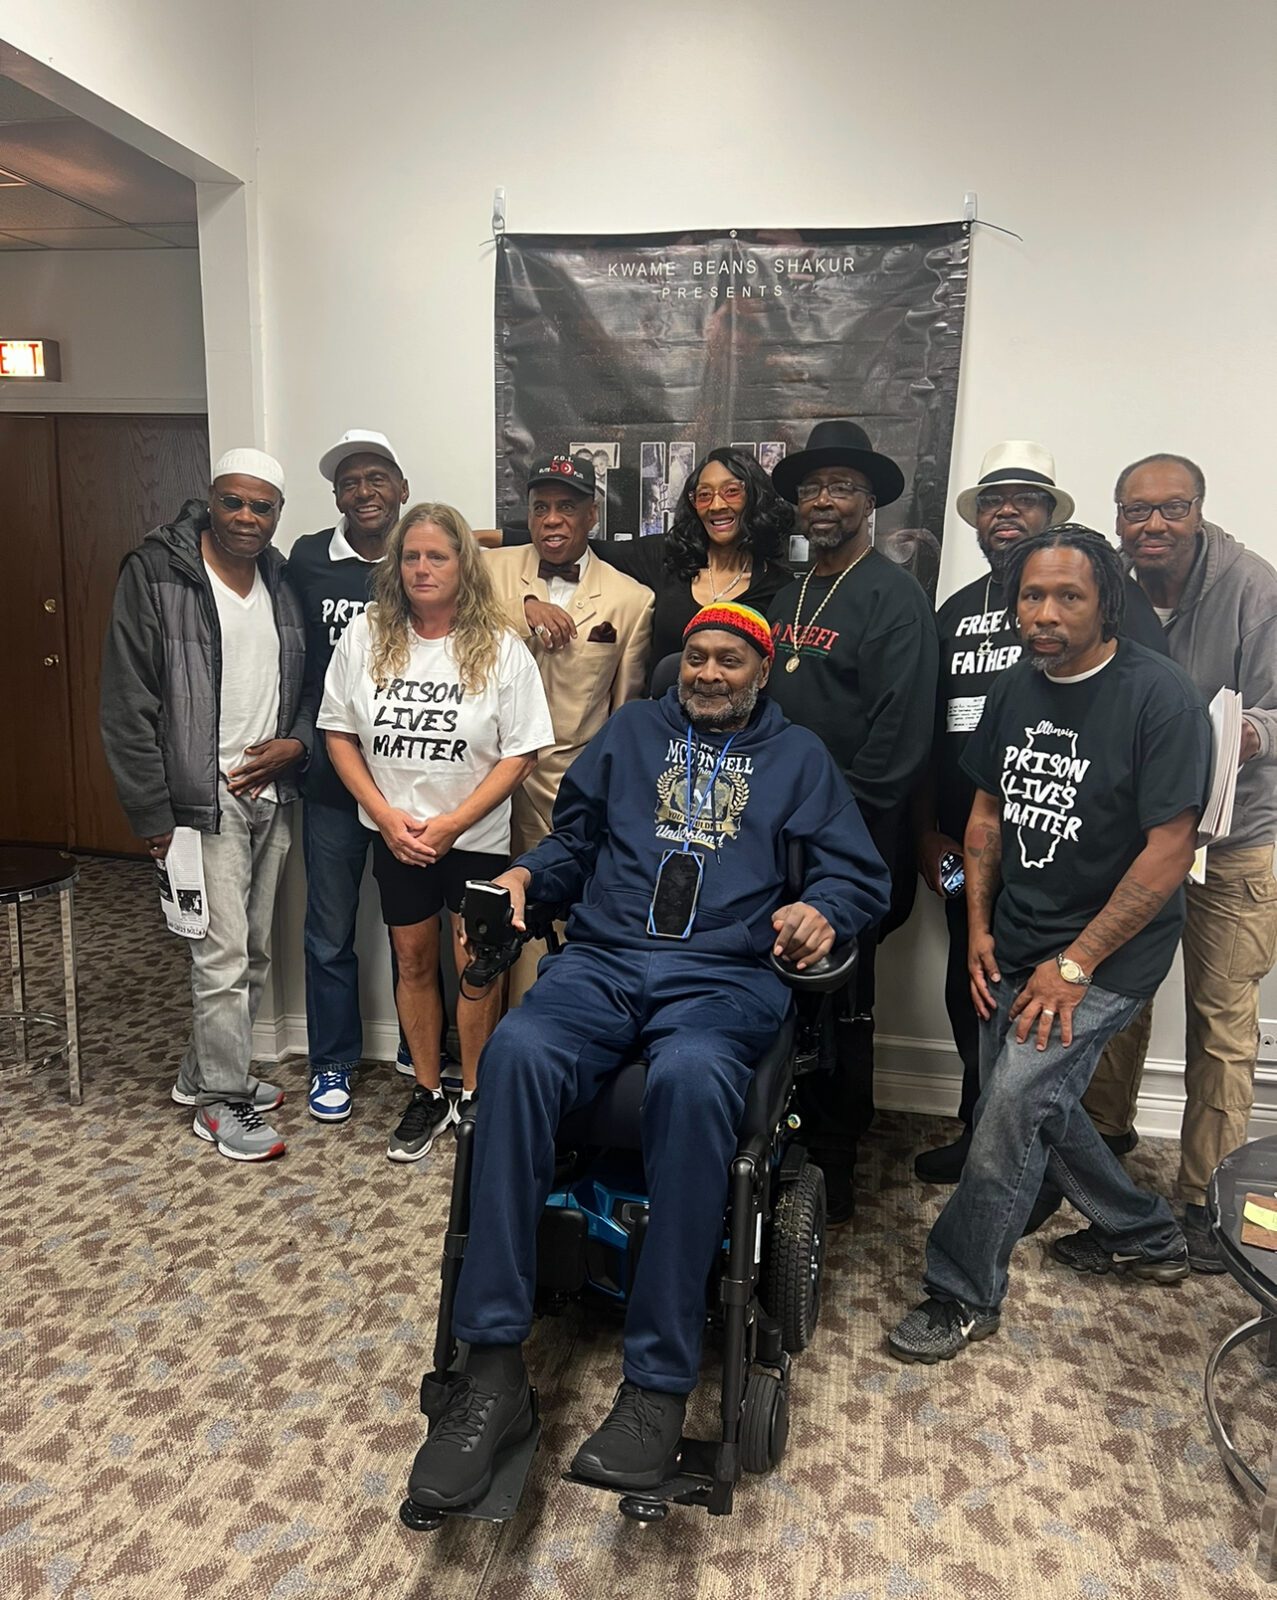 prison-lives-matter-liberate-our-elders-webinar-chicago-panel-1-scaled, Kwame ‘Beans’ Shakur: Call to Action for National Unification, Abolition Now! 